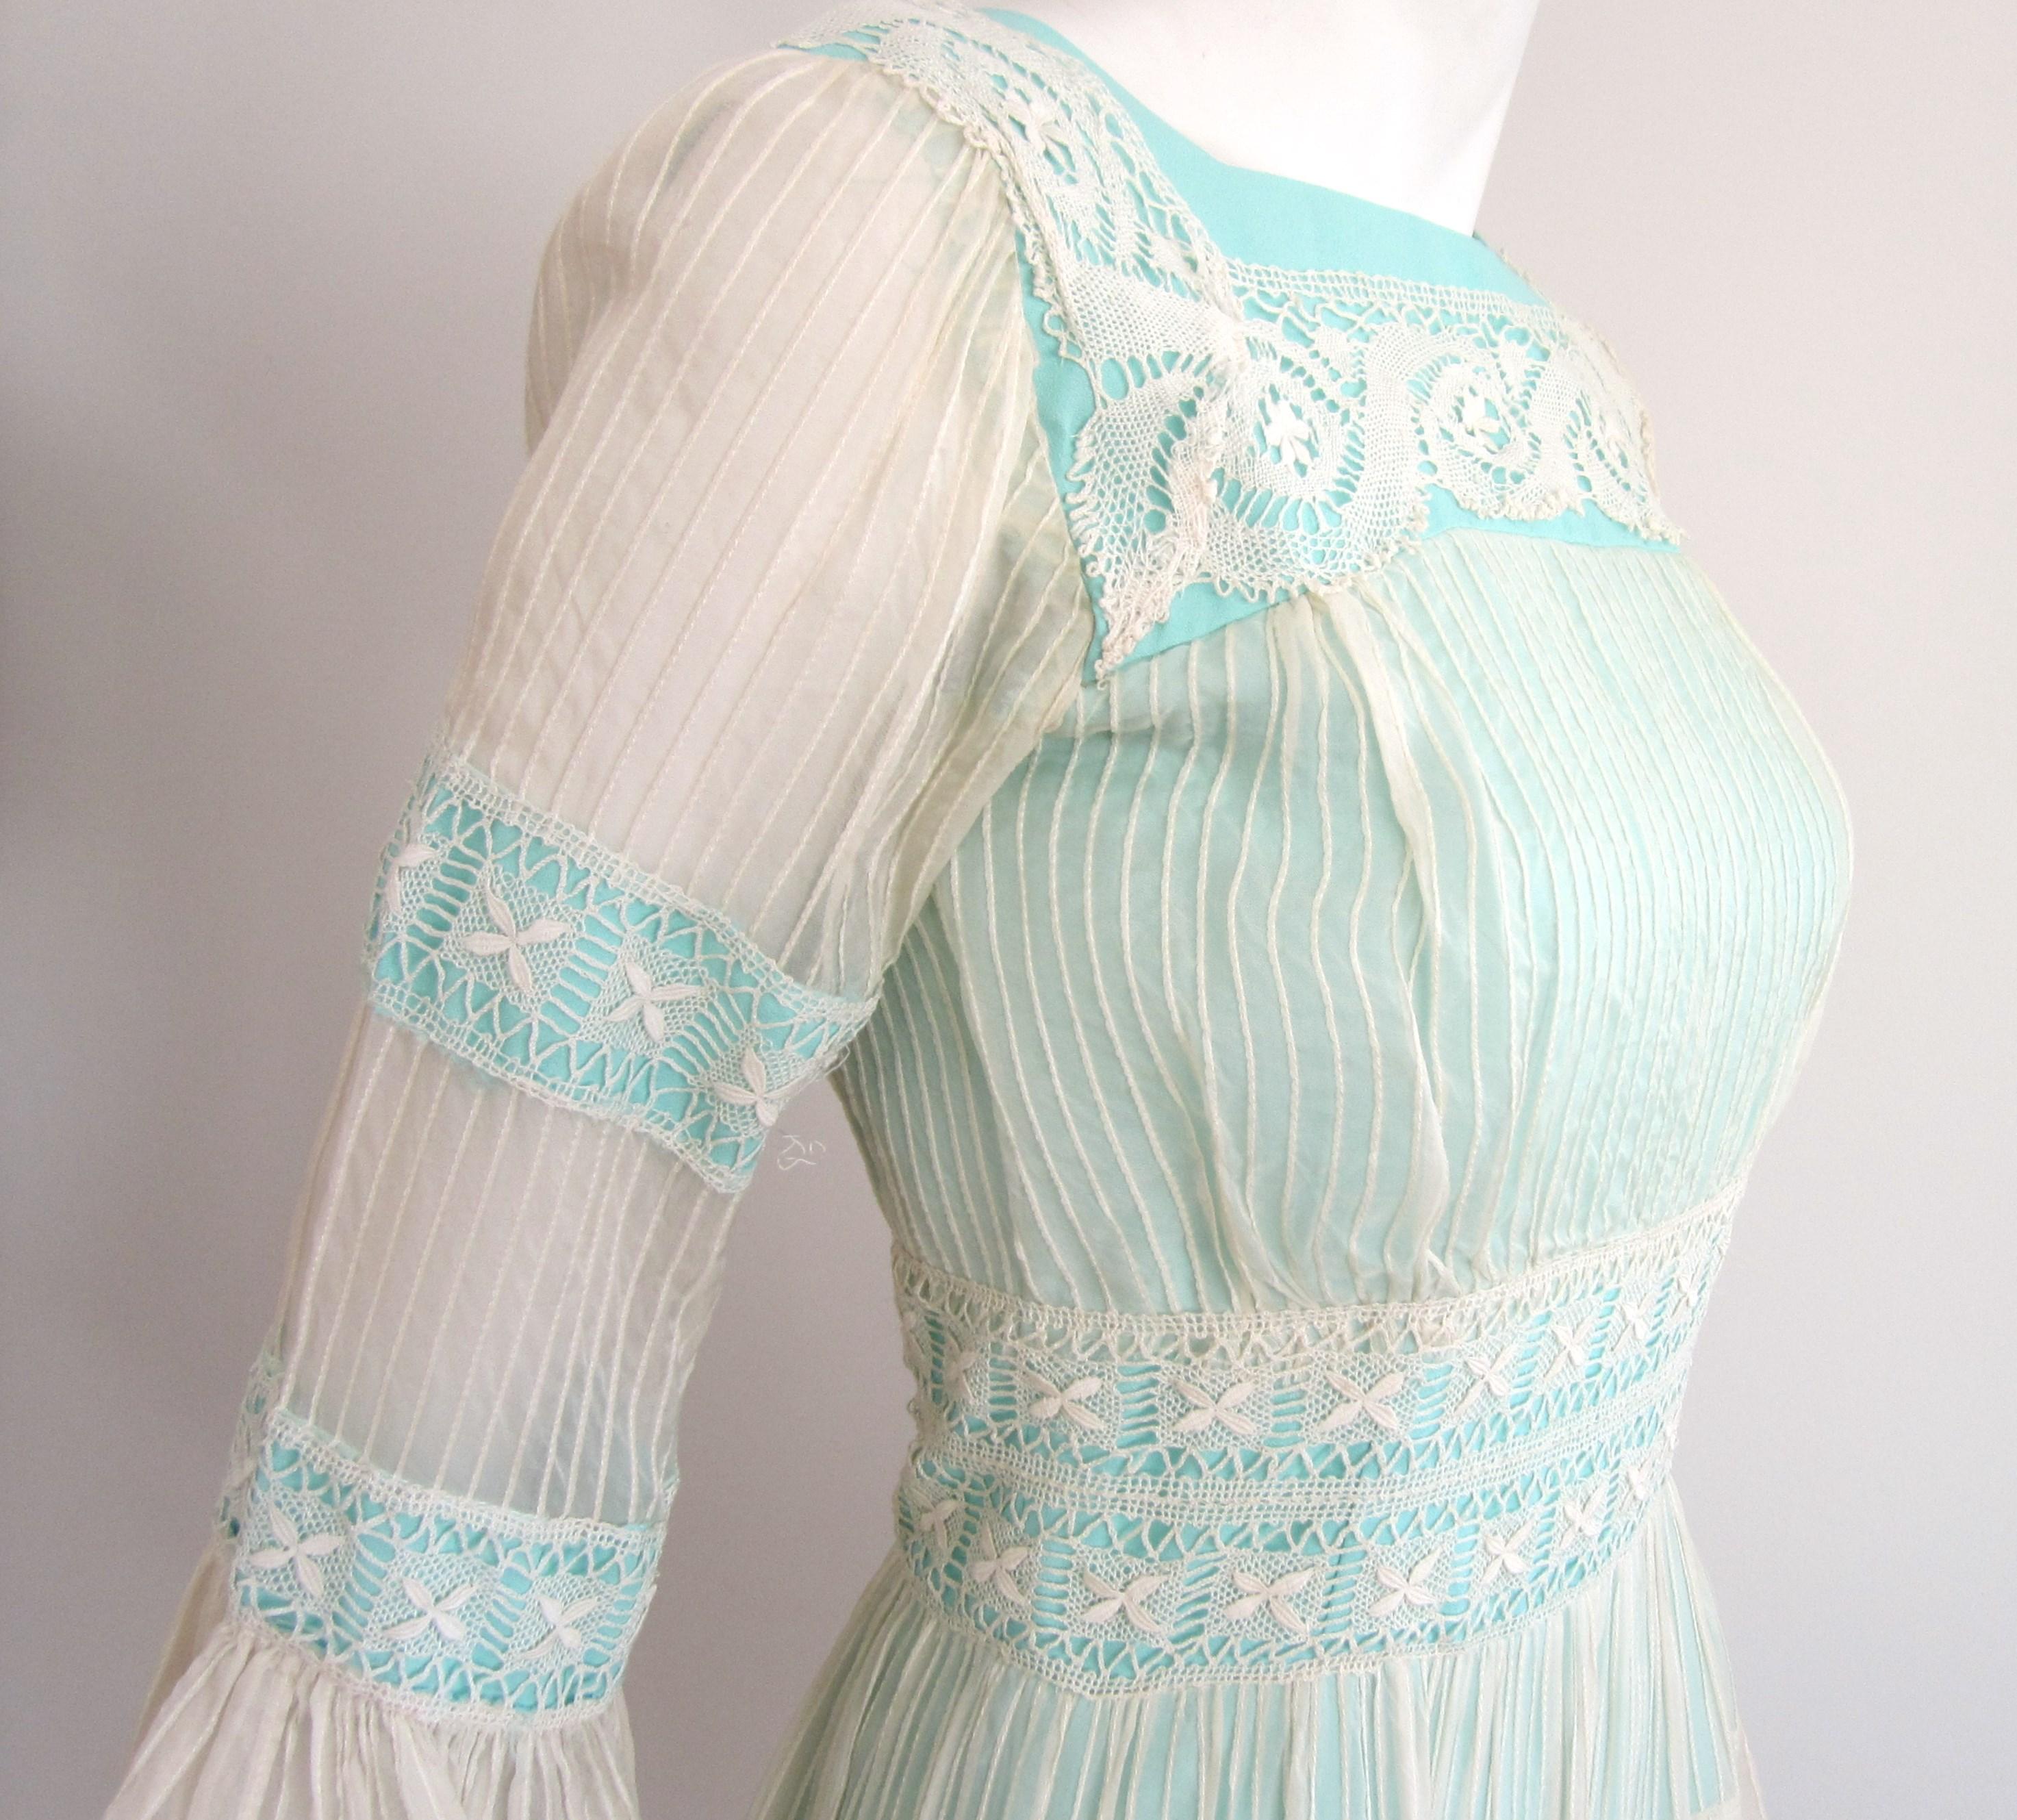 1960s Maxi Dress  - Early 1970s cottagecore Blue  For Sale 1